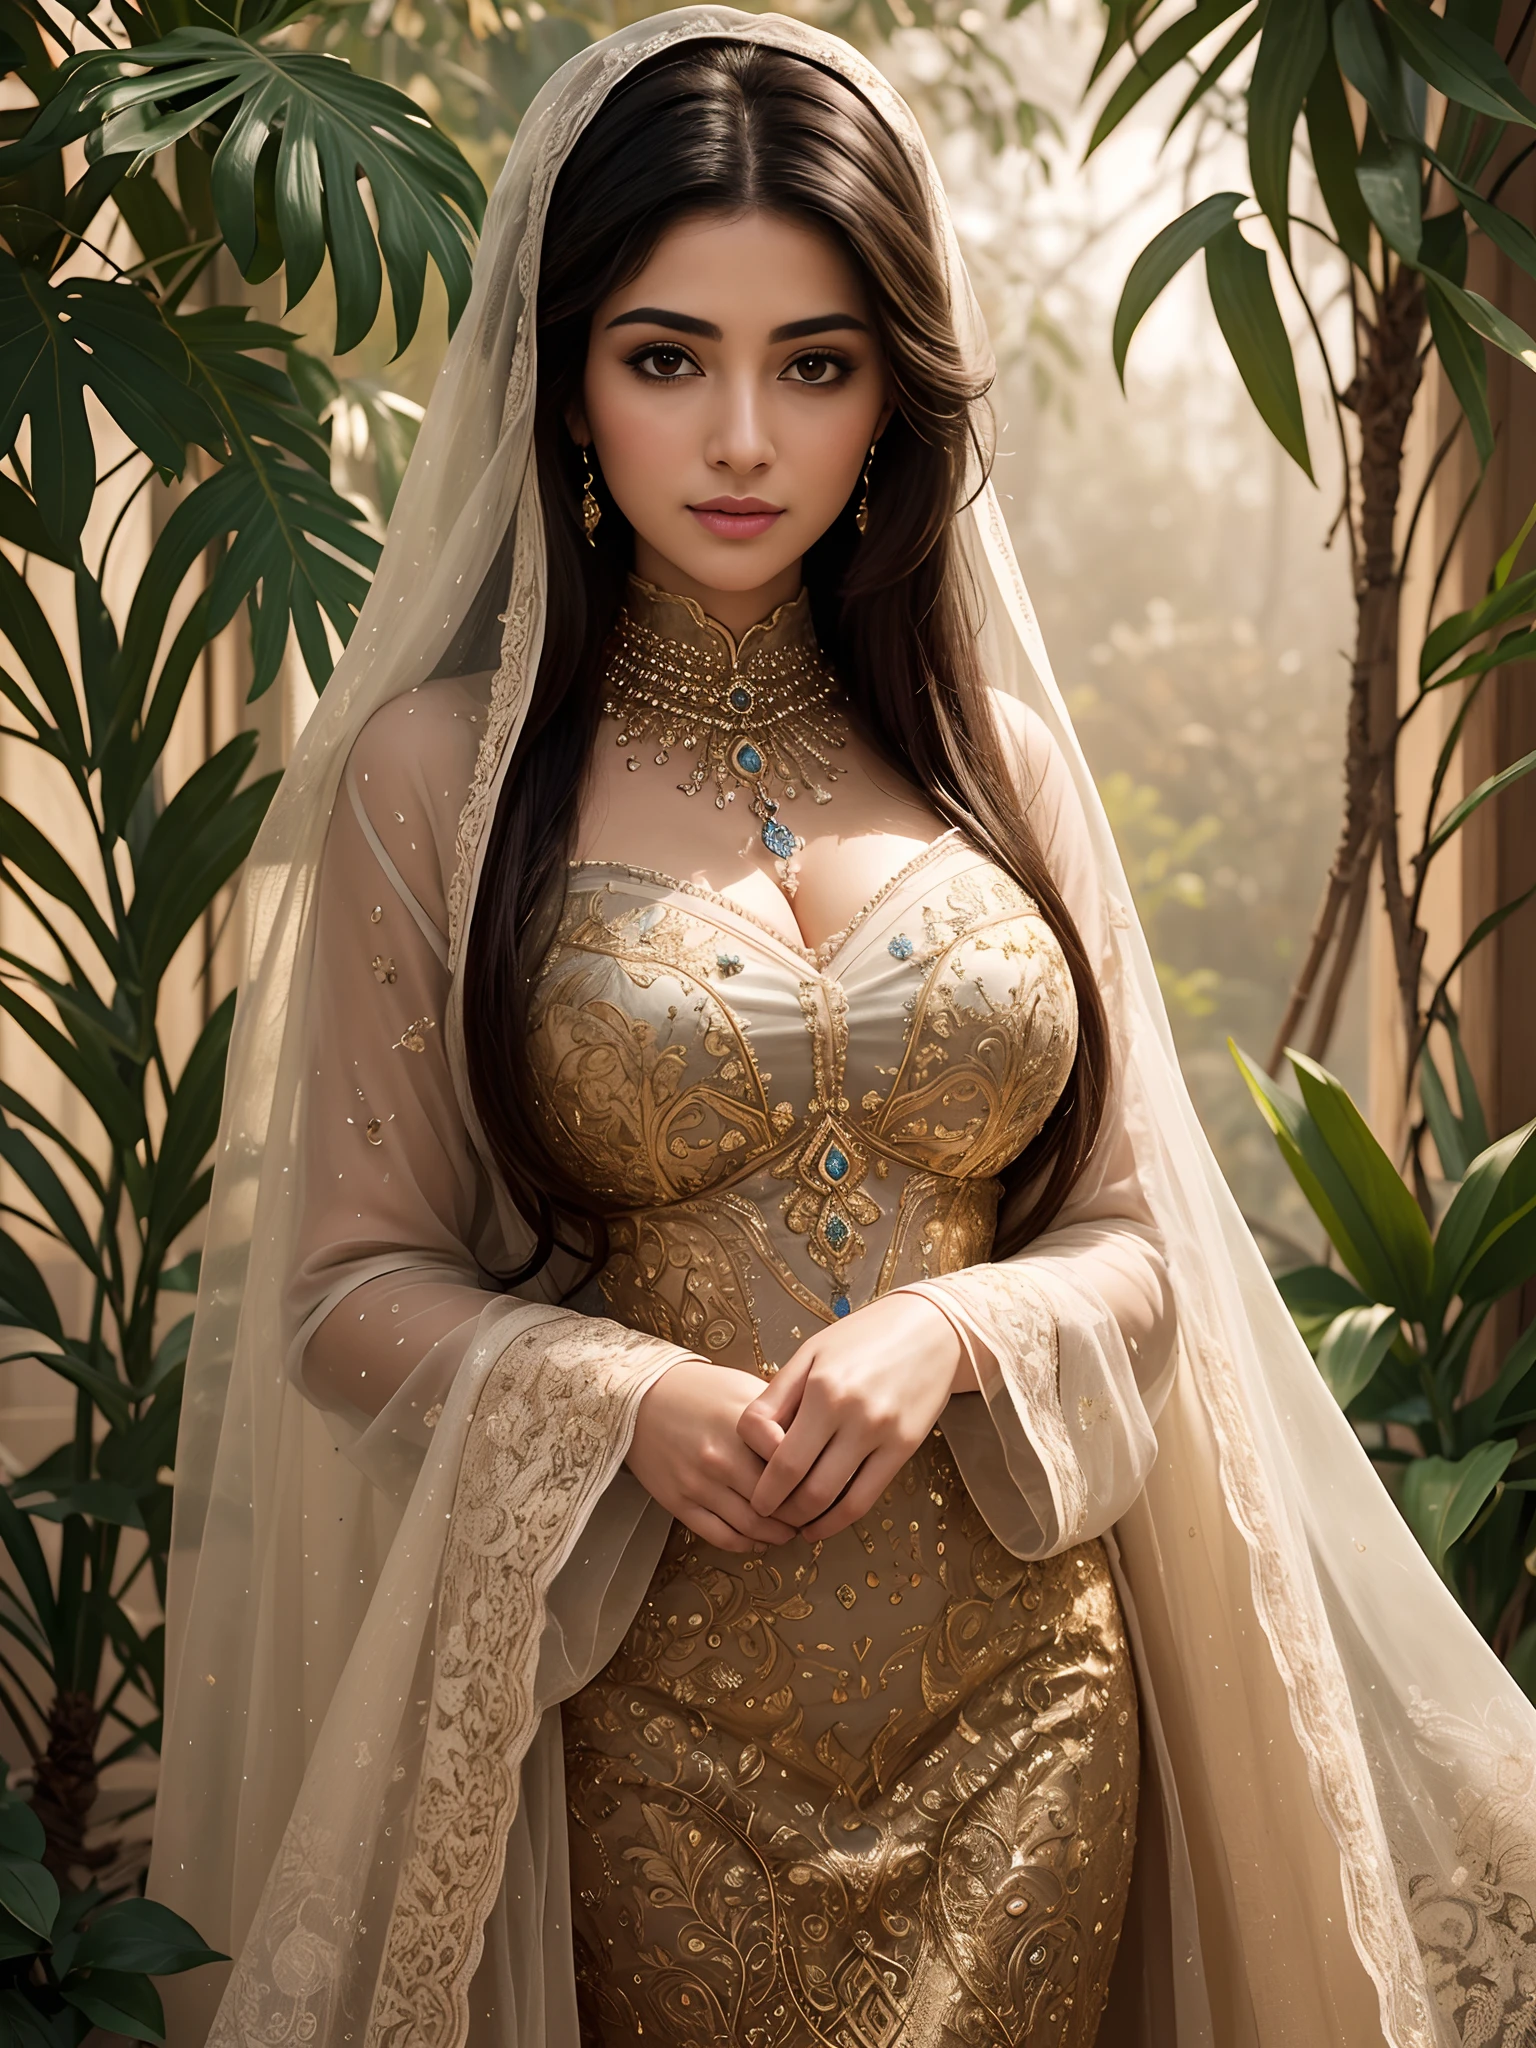 Cute, gorgeous, busty Saudi mom, (best quality, 4k, highres, masterpiece:1.2), ultra-detailed, (realistic:1.37)
  
In this beautiful portrait, a cute, gorgeous, busty Saudi mom takes center stage. Her stunning features are highlighted by her beautiful, mesmerizing eyes and luscious lips. Every detail of her face is carefully captured, from the delicate lines around her eyes to the plumpness of her lips. 

The artwork is created using a combination of traditional medium and digital illustration, resulting in a breathtaking mix of artistry and technology. The texture of the canvas and the intricate strokes of the brush create a visually striking effect. 

Surrounding the Saudi mom, the background depicts a peaceful and serene garden, with vibrant flowers and lush greenery. The sunlight softly filters through the trees, casting a warm glow on her face. The artist skillfully captures this lighting, enhancing the realistic and photorealistic quality of the artwork.

The color palette is carefully chosen to complement the Saudi mom's radiant beauty. Soft pastel tones dominate the scene, creating a delicate and feminine atmosphere. The colors blend seamlessly, adding depth and dimension to the composition.

The emphasis on high image quality ensures every detail is crisp and clear. The artwork is presented in 4k resolution, allowing viewers to appreciate the intricate details and fine textures. The use of studio lighting techniques further enhances the realistic portrayal of the Saudi mom, creating a sense of depth and three-dimensionality.

This masterpiece showcases the talent and skill of the artist. With extreme detail descriptions and a focus on realism, the artwork comes to life, capturing the essence of the gorgeous Saudi mom. This stunning portrait is sure to captivate viewers with its vivid colors, sharp focus, and impeccable craftsmanship.